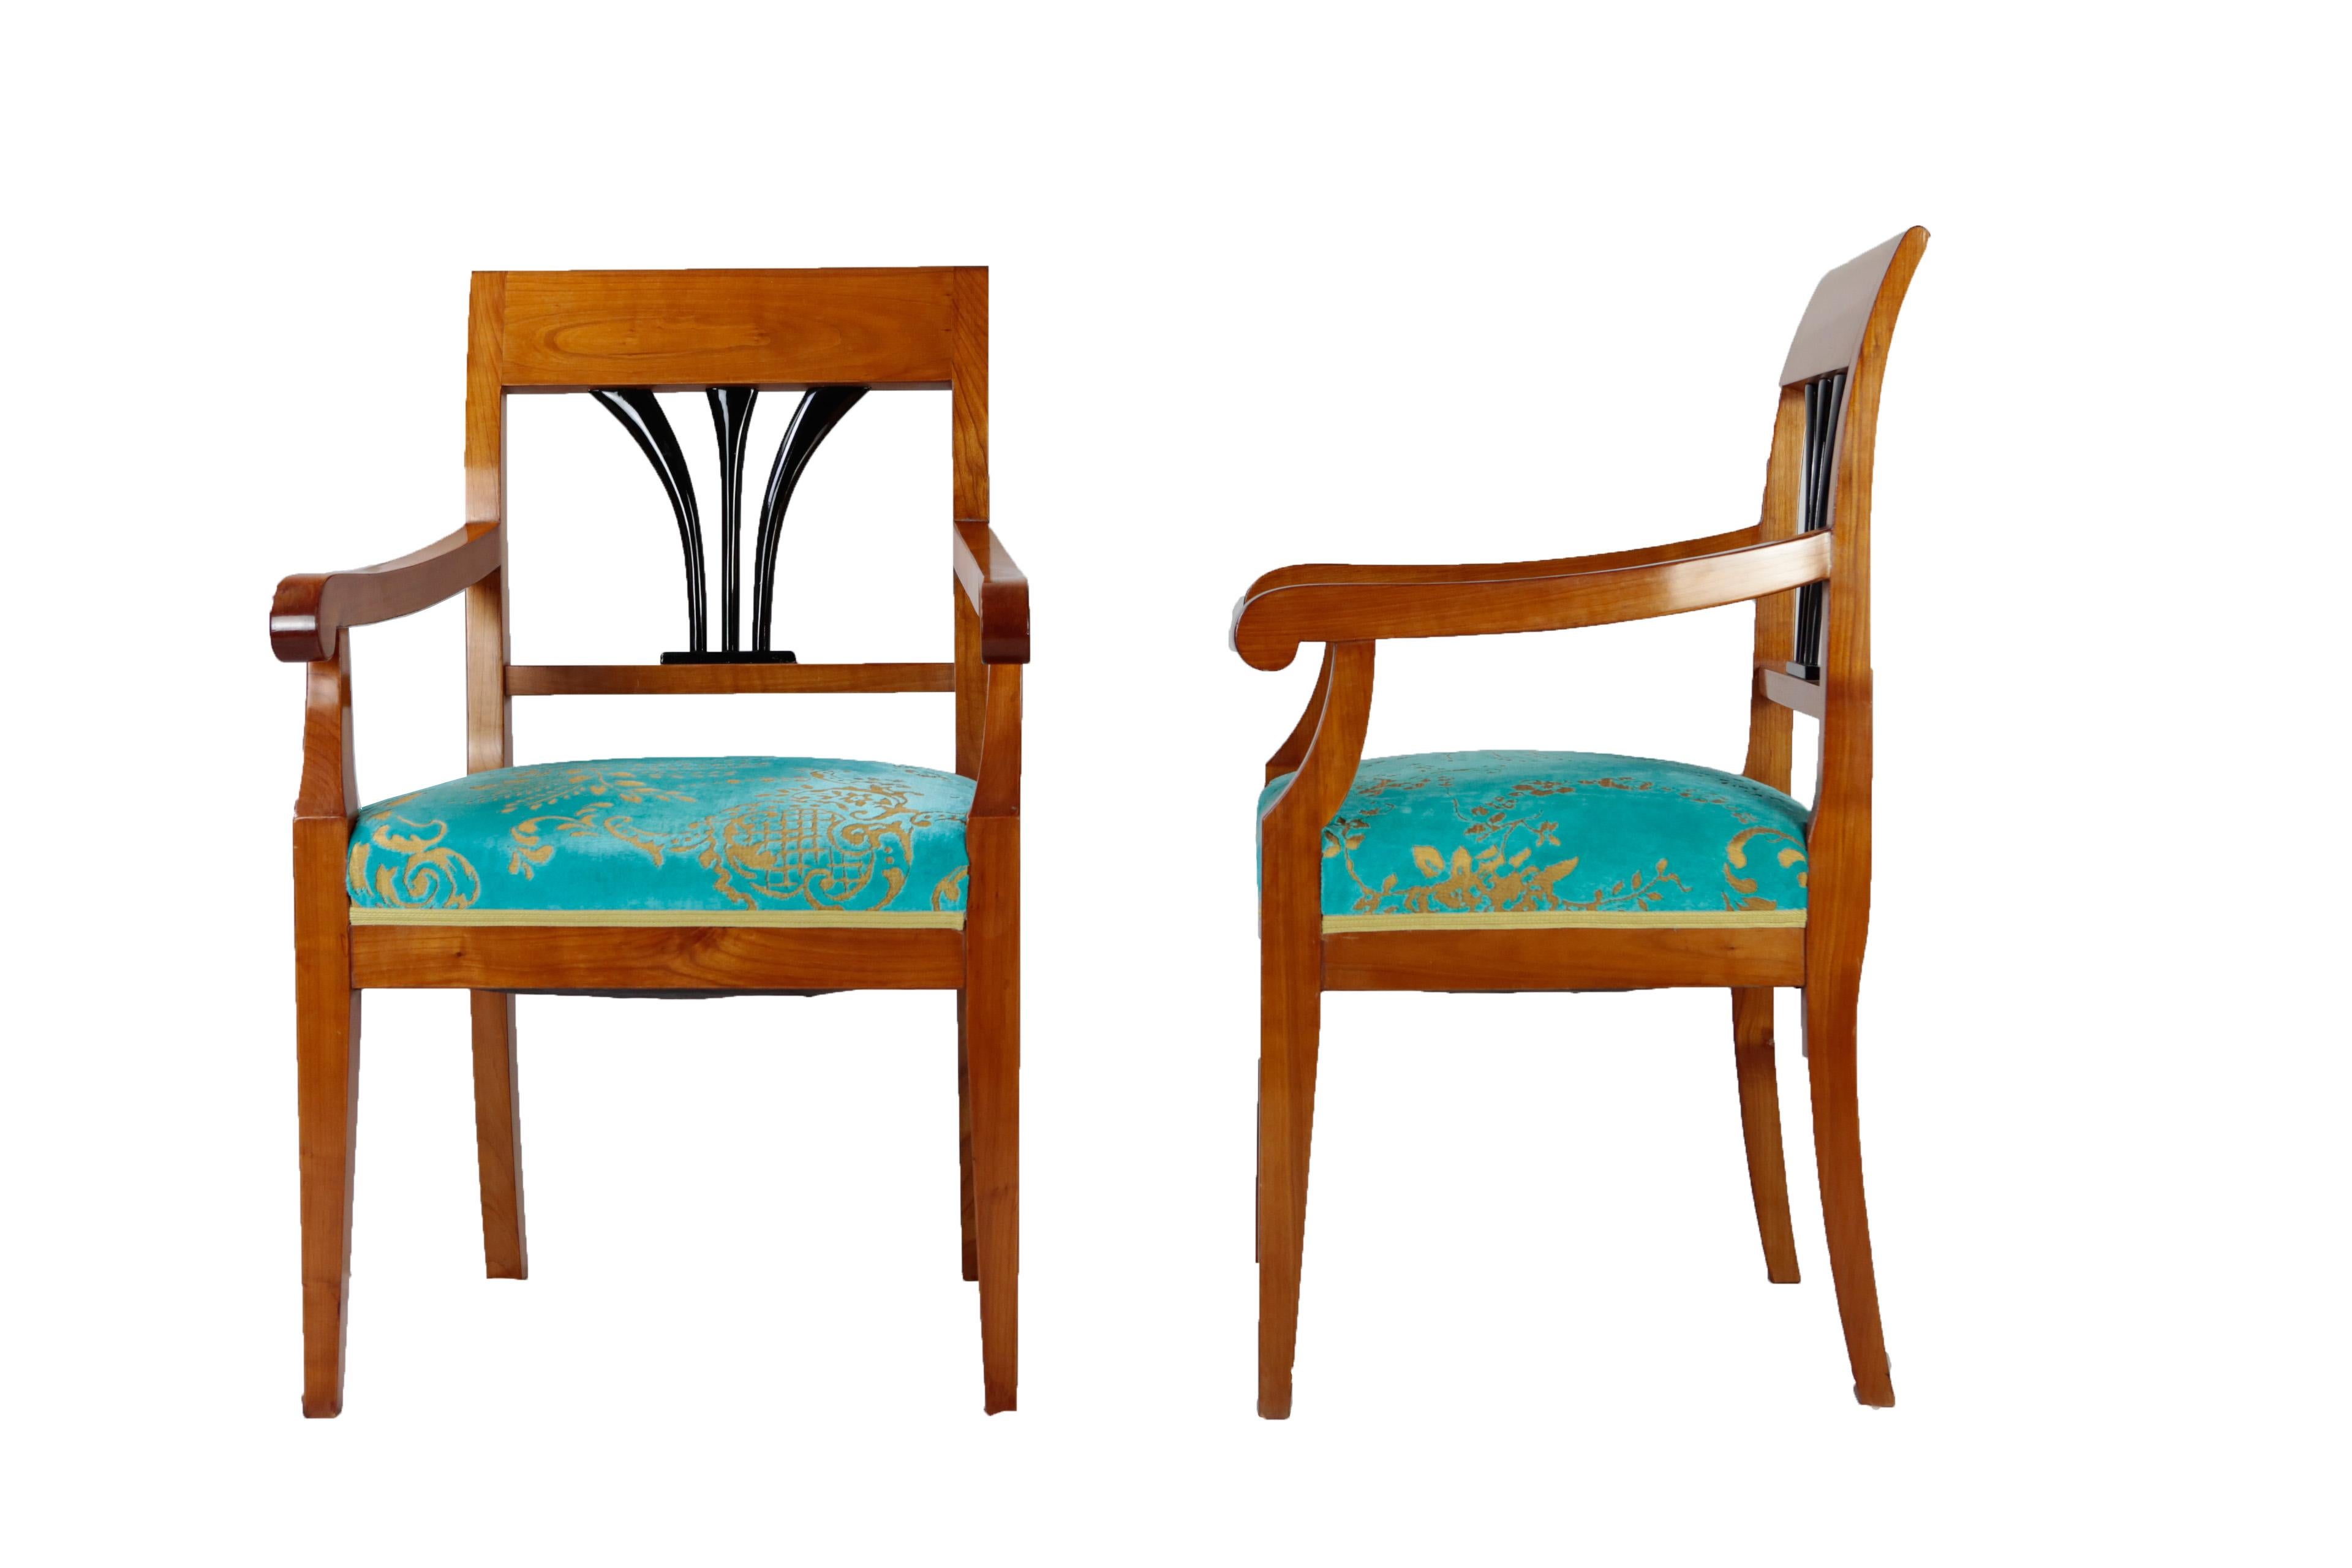 • Pair of armchairs, Biedermeier style
• Germany, 20th century
• Solid cherrywood
• Backrest with ebonized struts
• Shellac hand polished and newly upholstered, designers guild fabric
• Measures: Height 93 cm, width 58 cm, depth 55 cm, seat